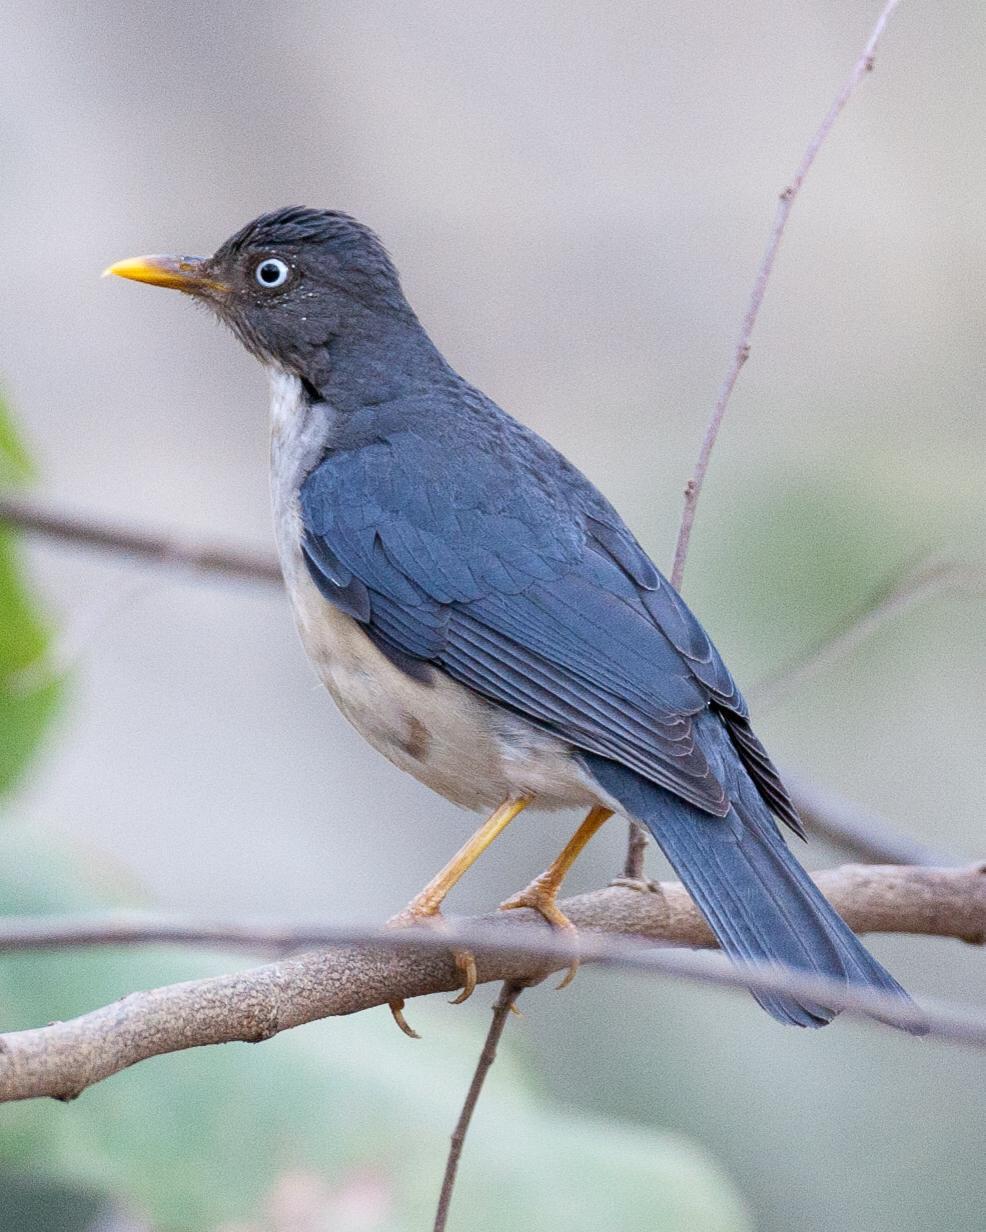 Plumbeous-backed Thrush Photo by Robert Lewis